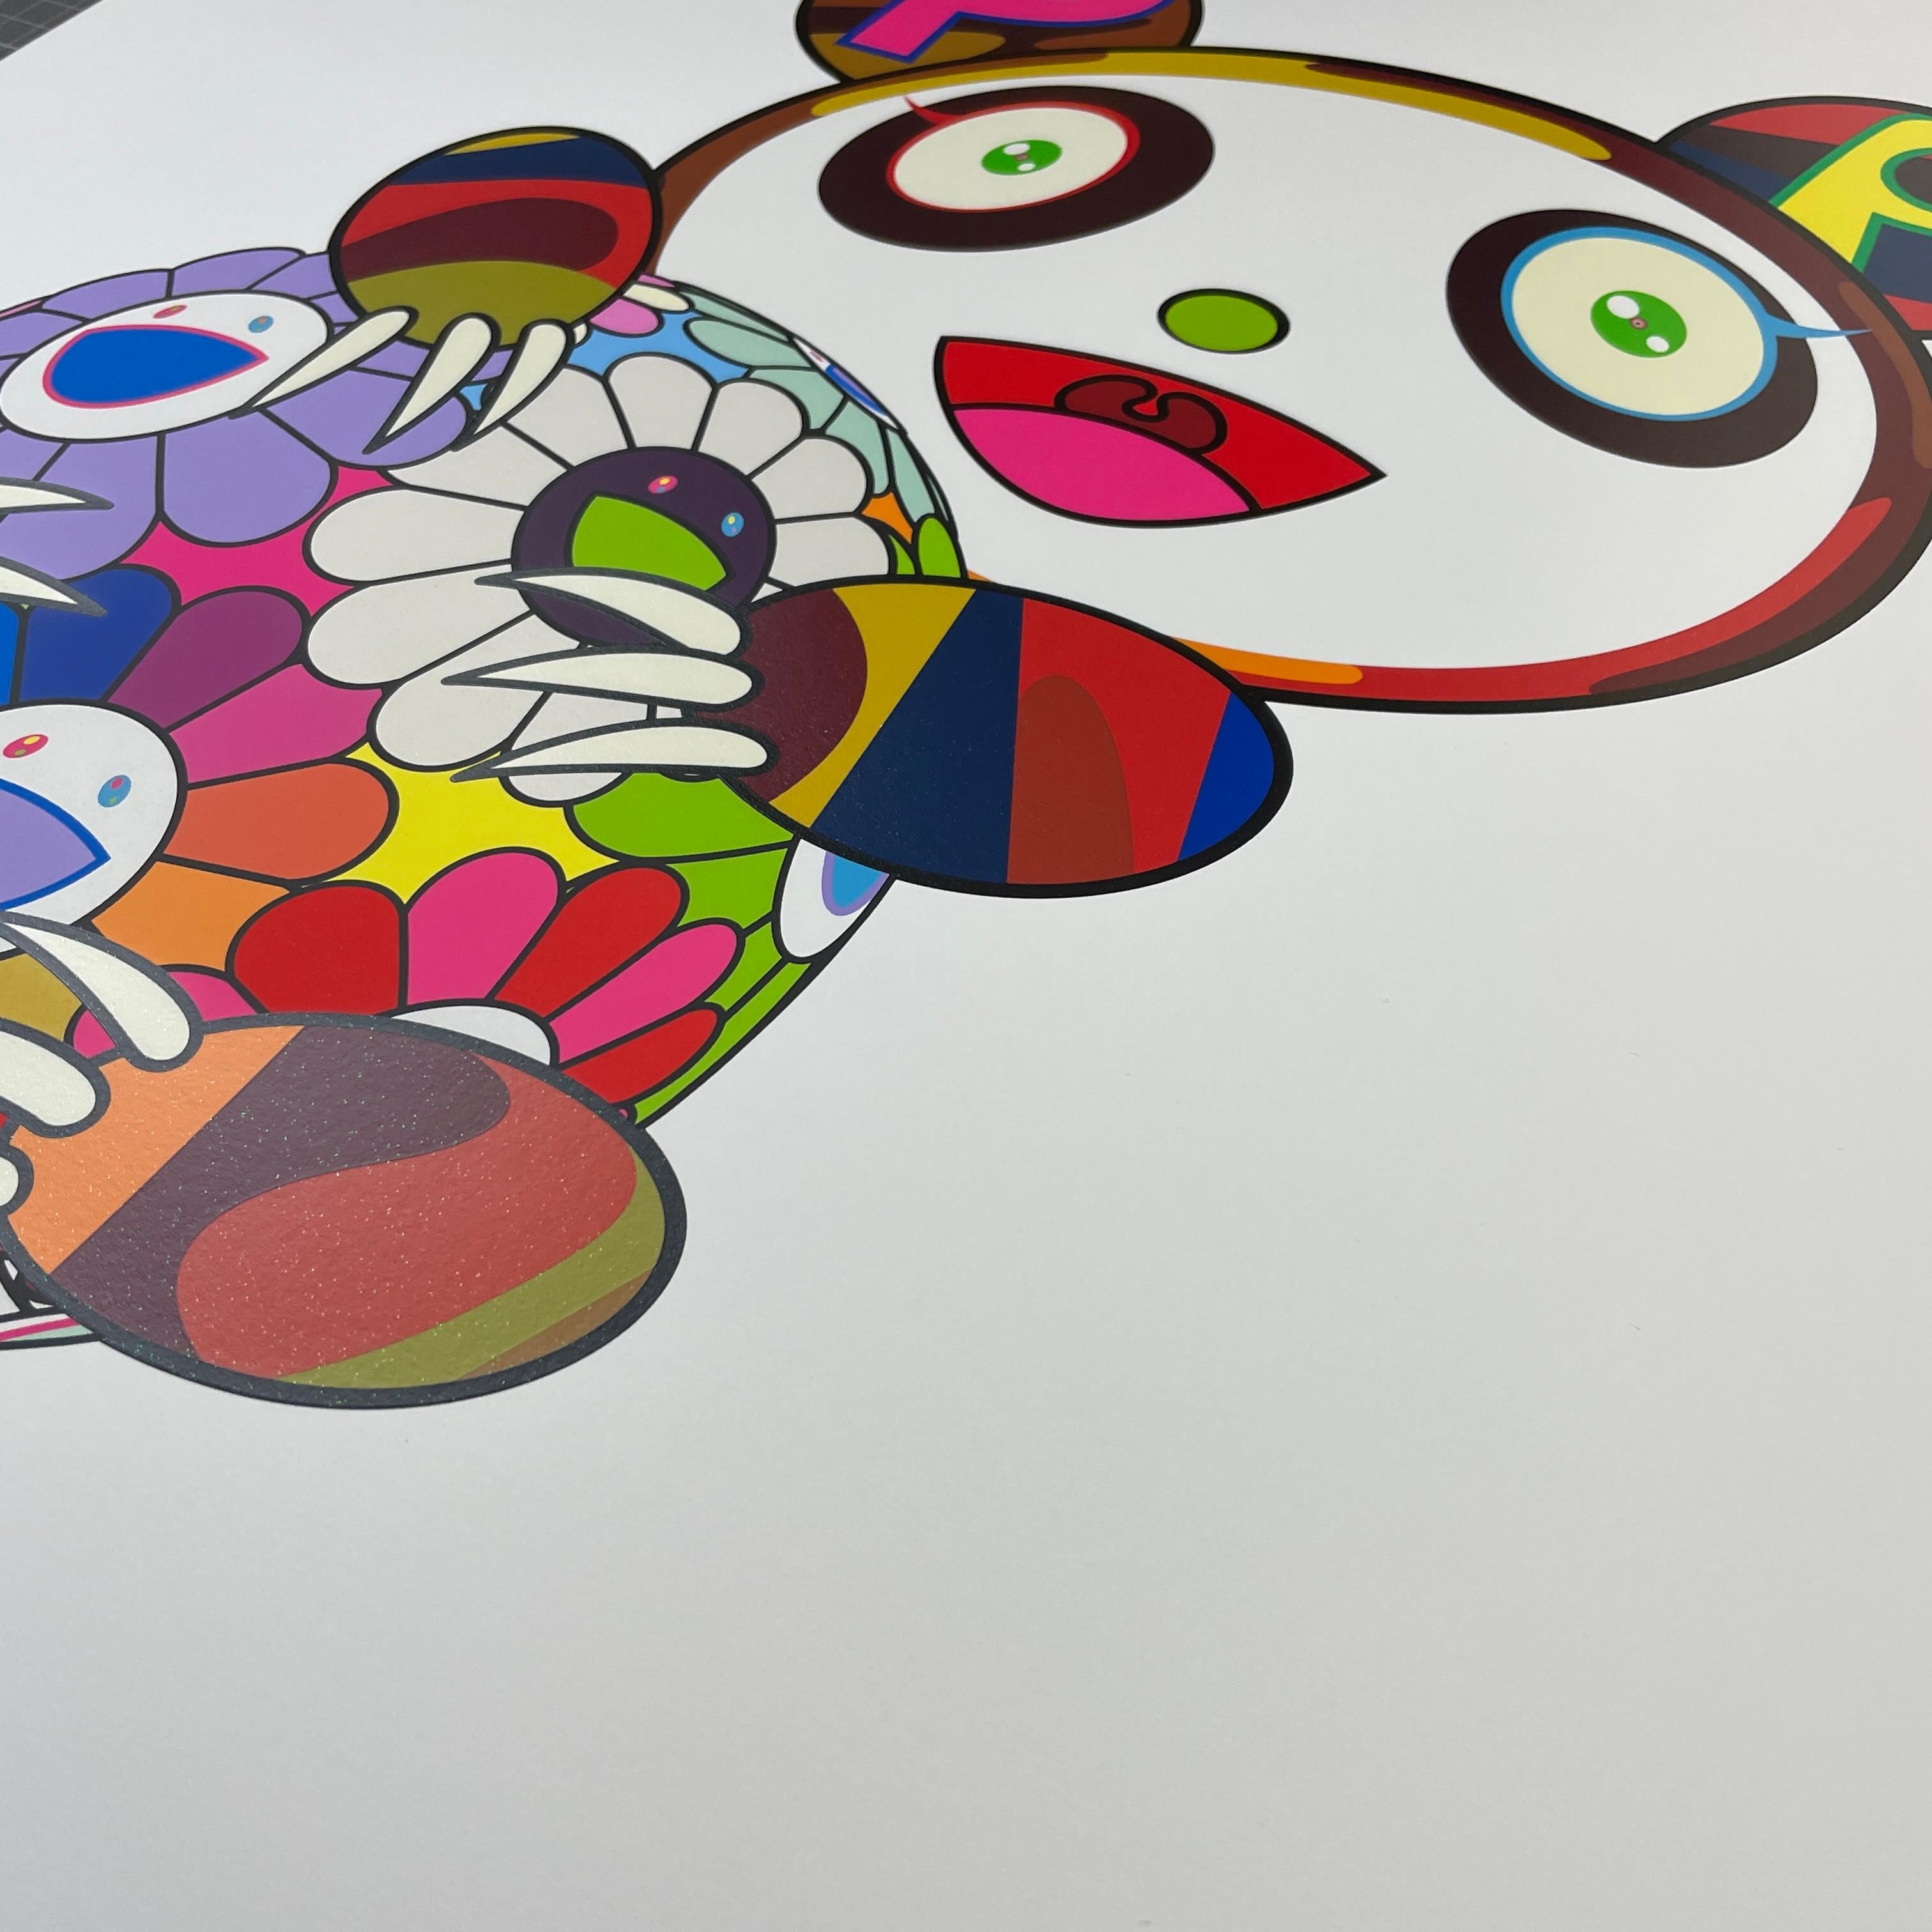 Artist: Takashi Murakami
Title: A Panda Cub Hugging a Ball of Flowers
Year: 2021
Edition: 100
Size: 500 x 500mm (sheet size)
Medium: Silkscreen

This is hand signed by Takashi Murakami.

Note: This will be shipped from Japan so the buyer is